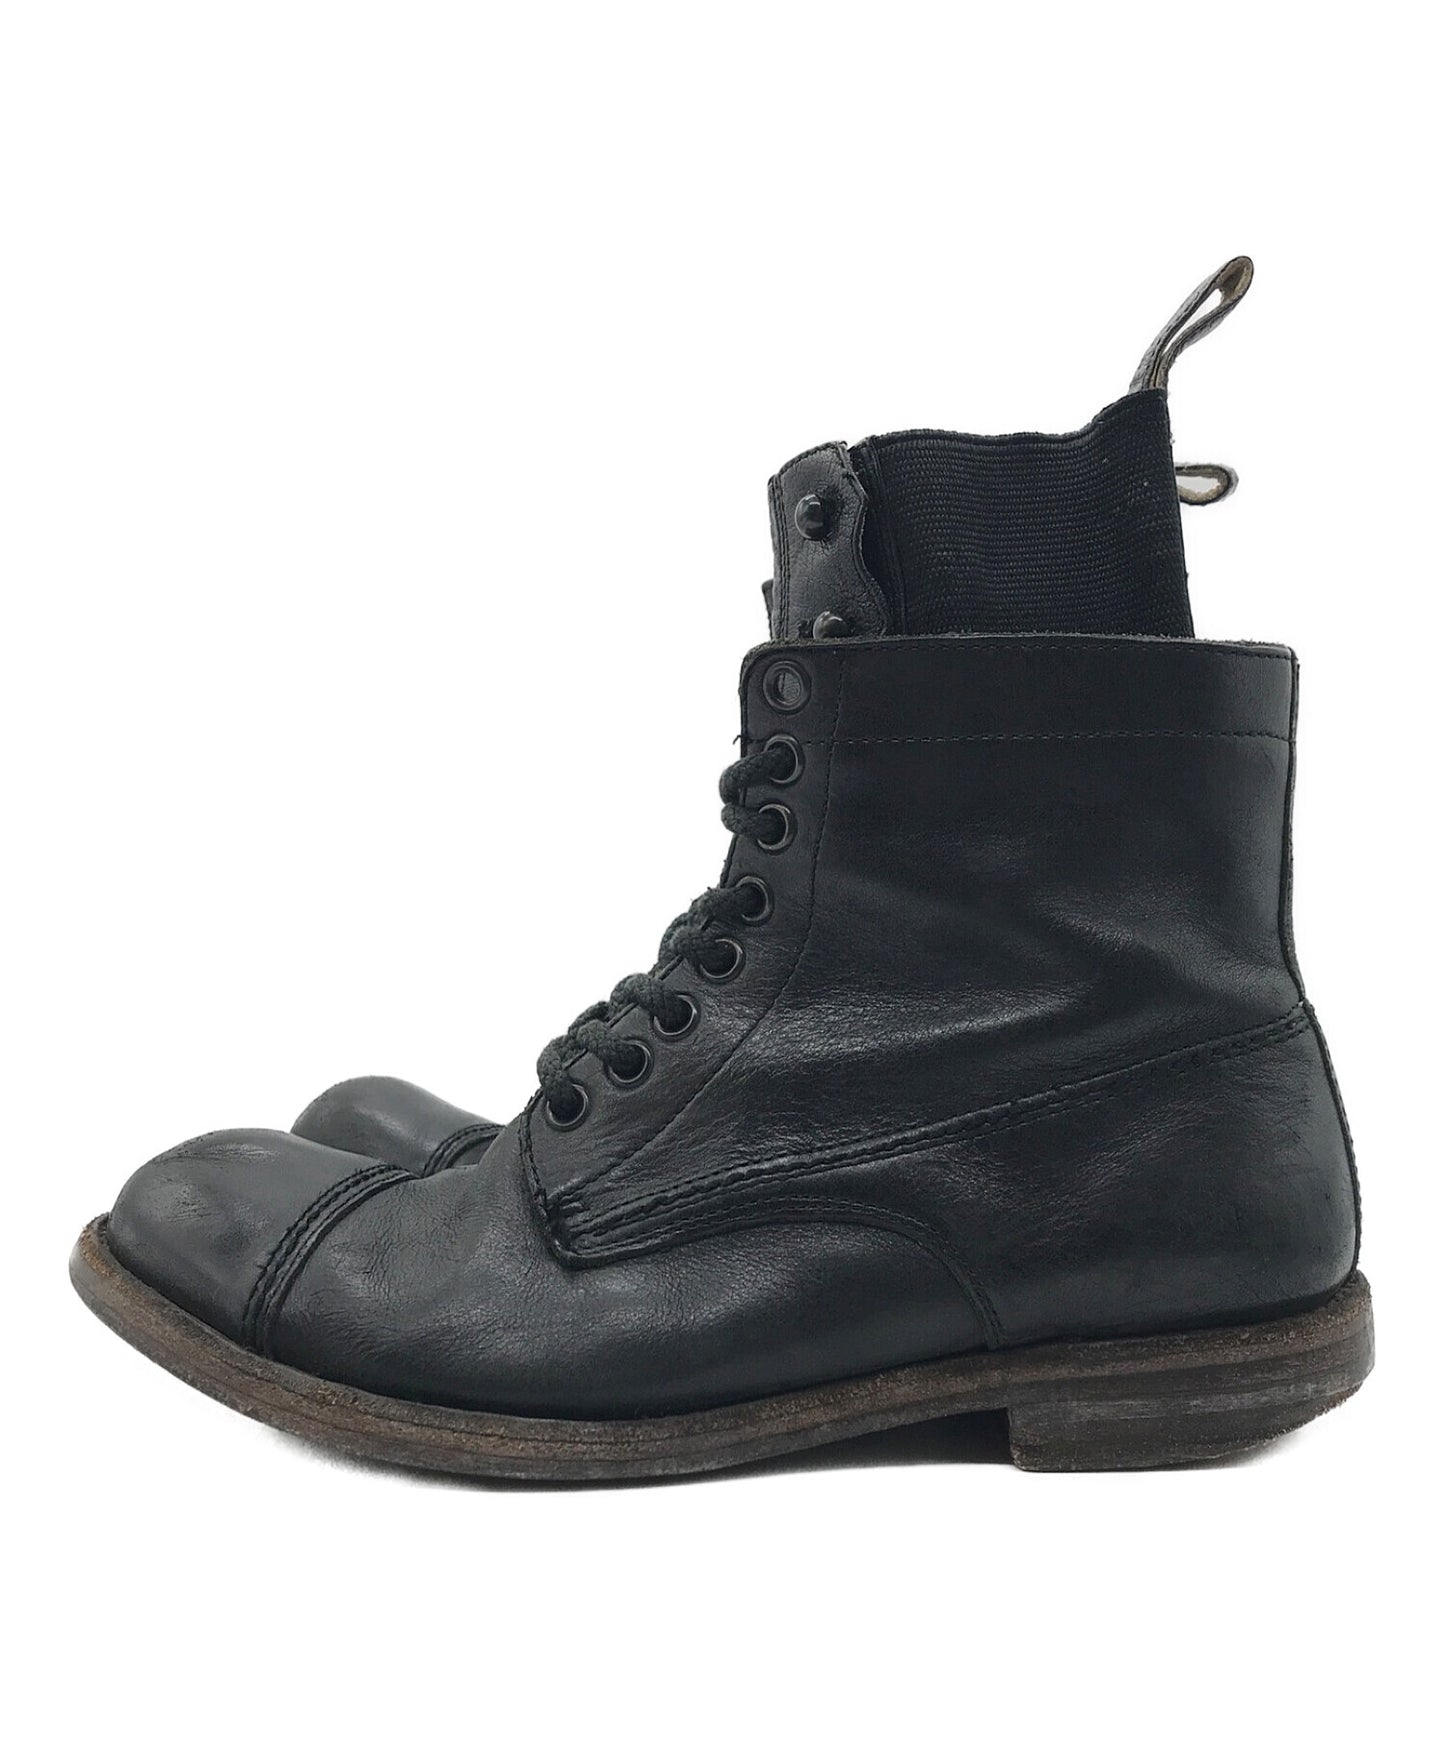 NCNnumber nine archive 07aw leather boots